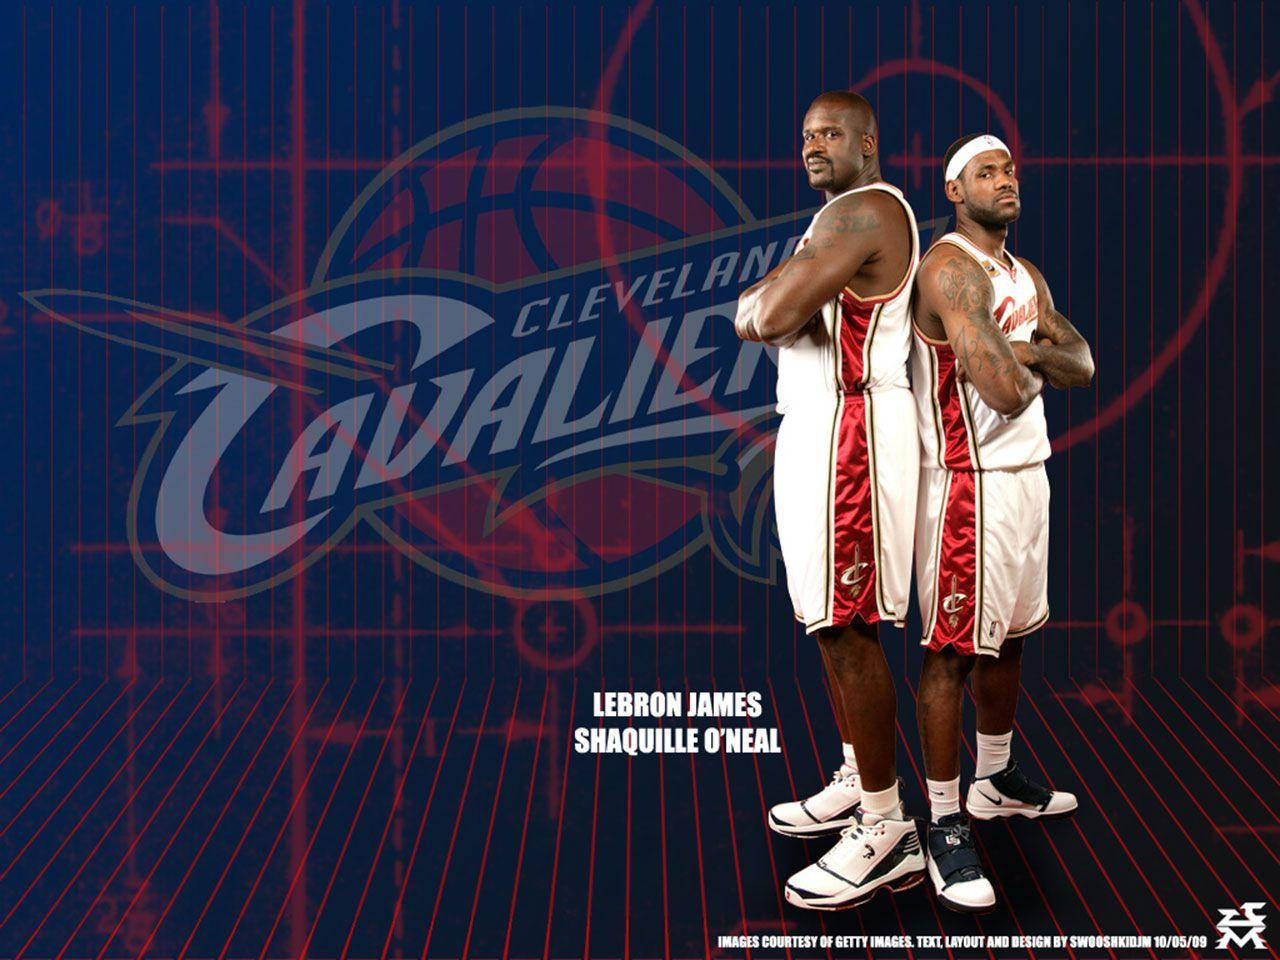 Shaquille O'neal Cavalier-poster Wallpaper